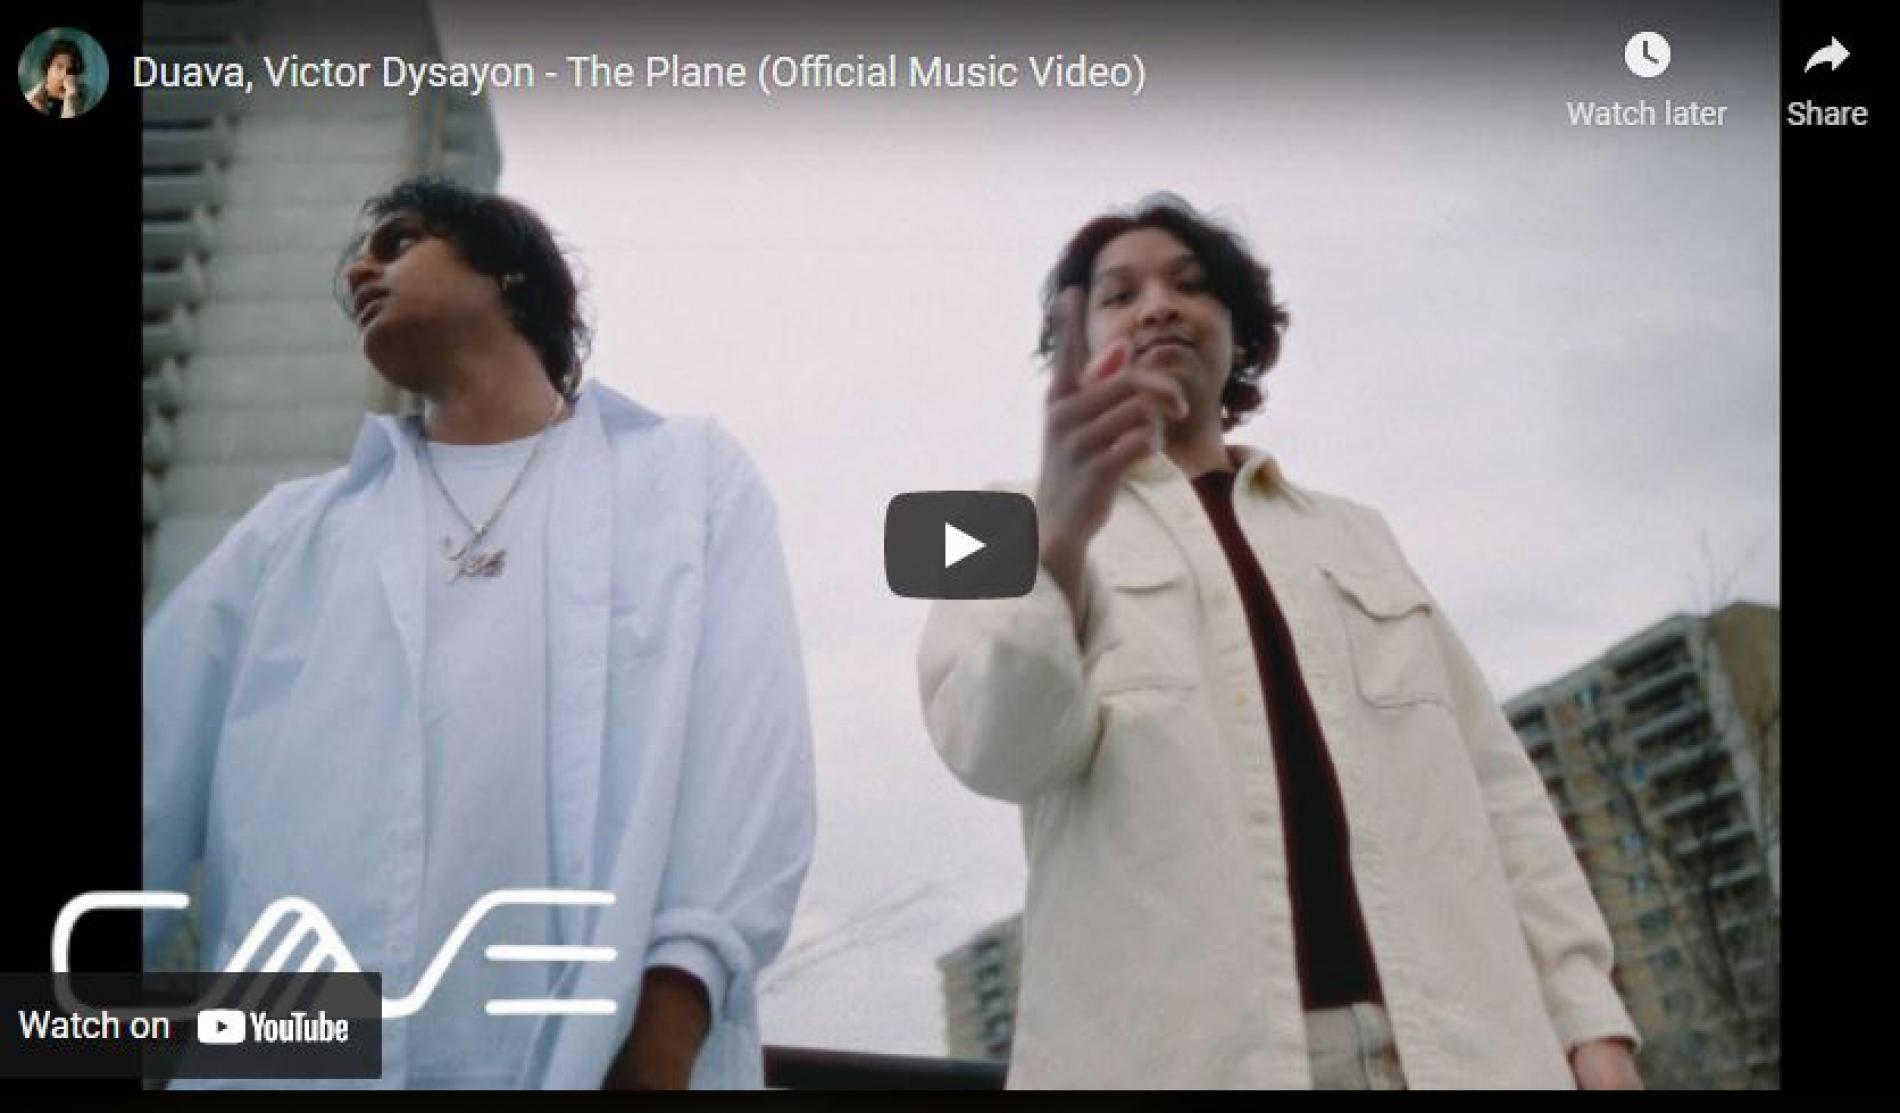 New Music : Duava, Victor Dysayon – The Plane (Official Music Video)